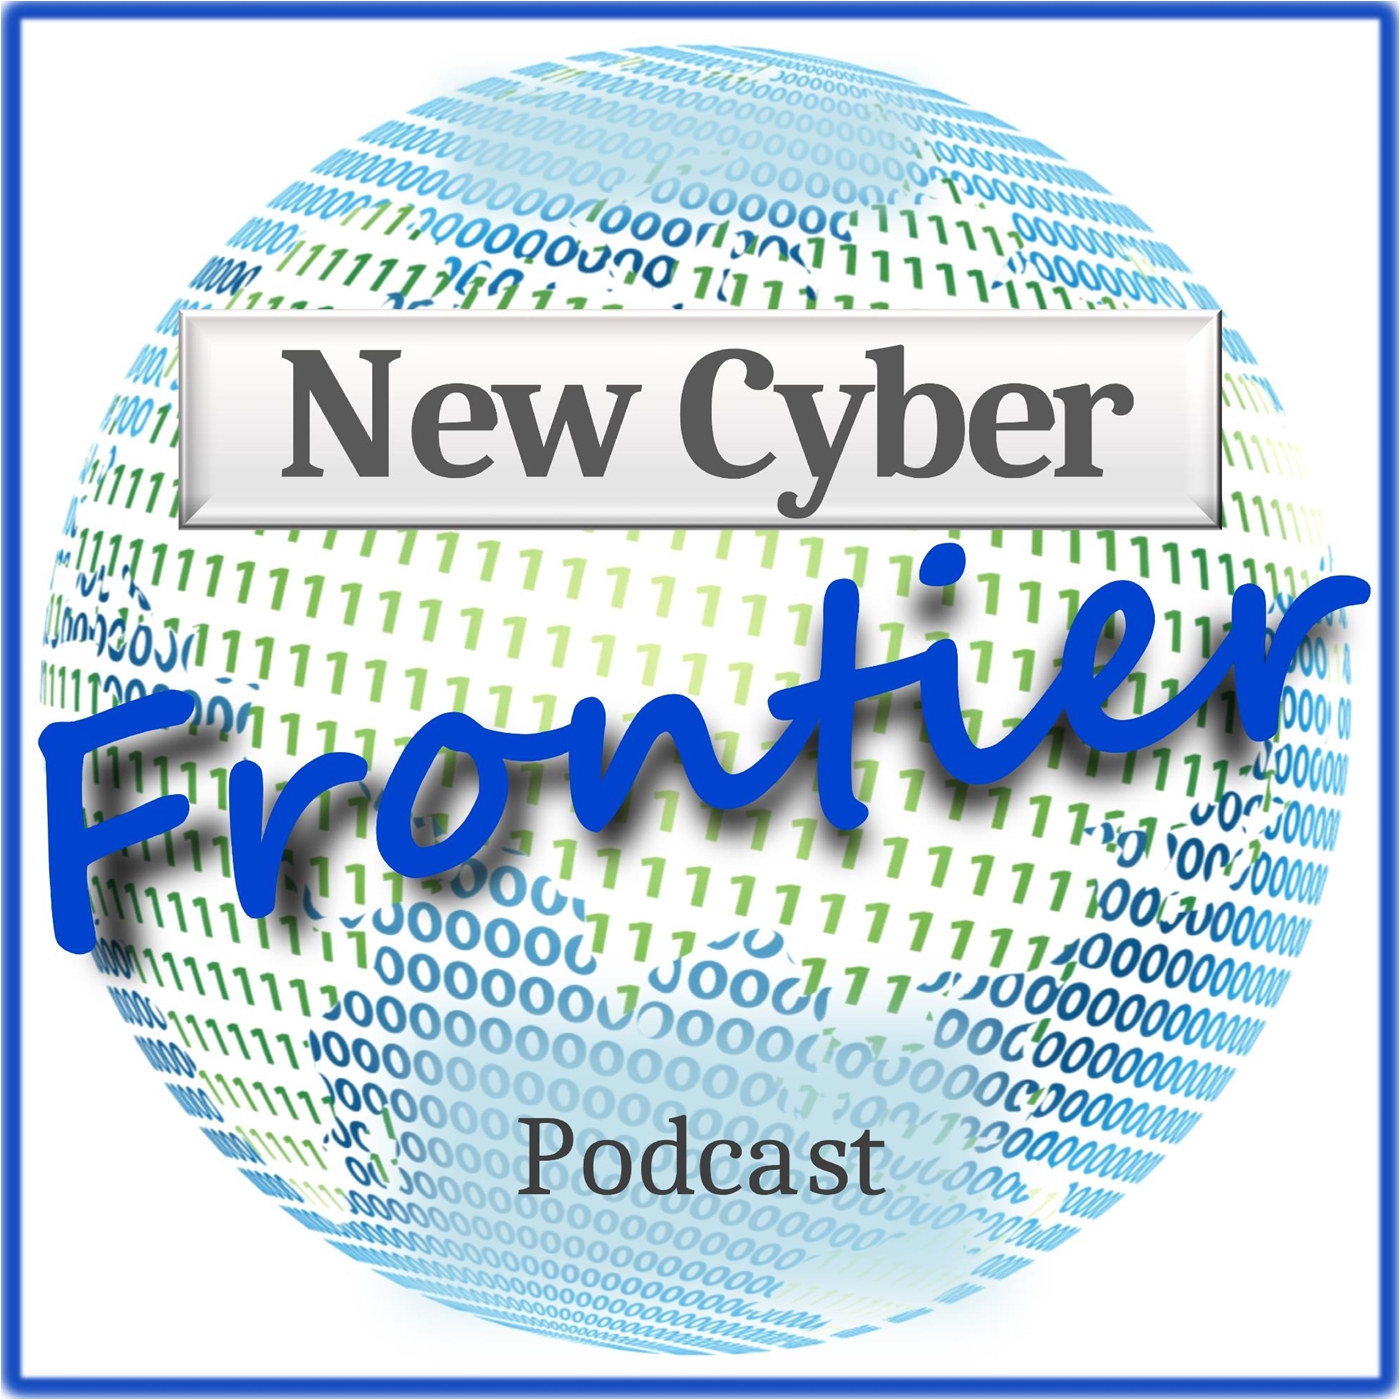 NCF-72 Airline Cyber Security - Is our Air Travel Really Safe from Cyber Attack?